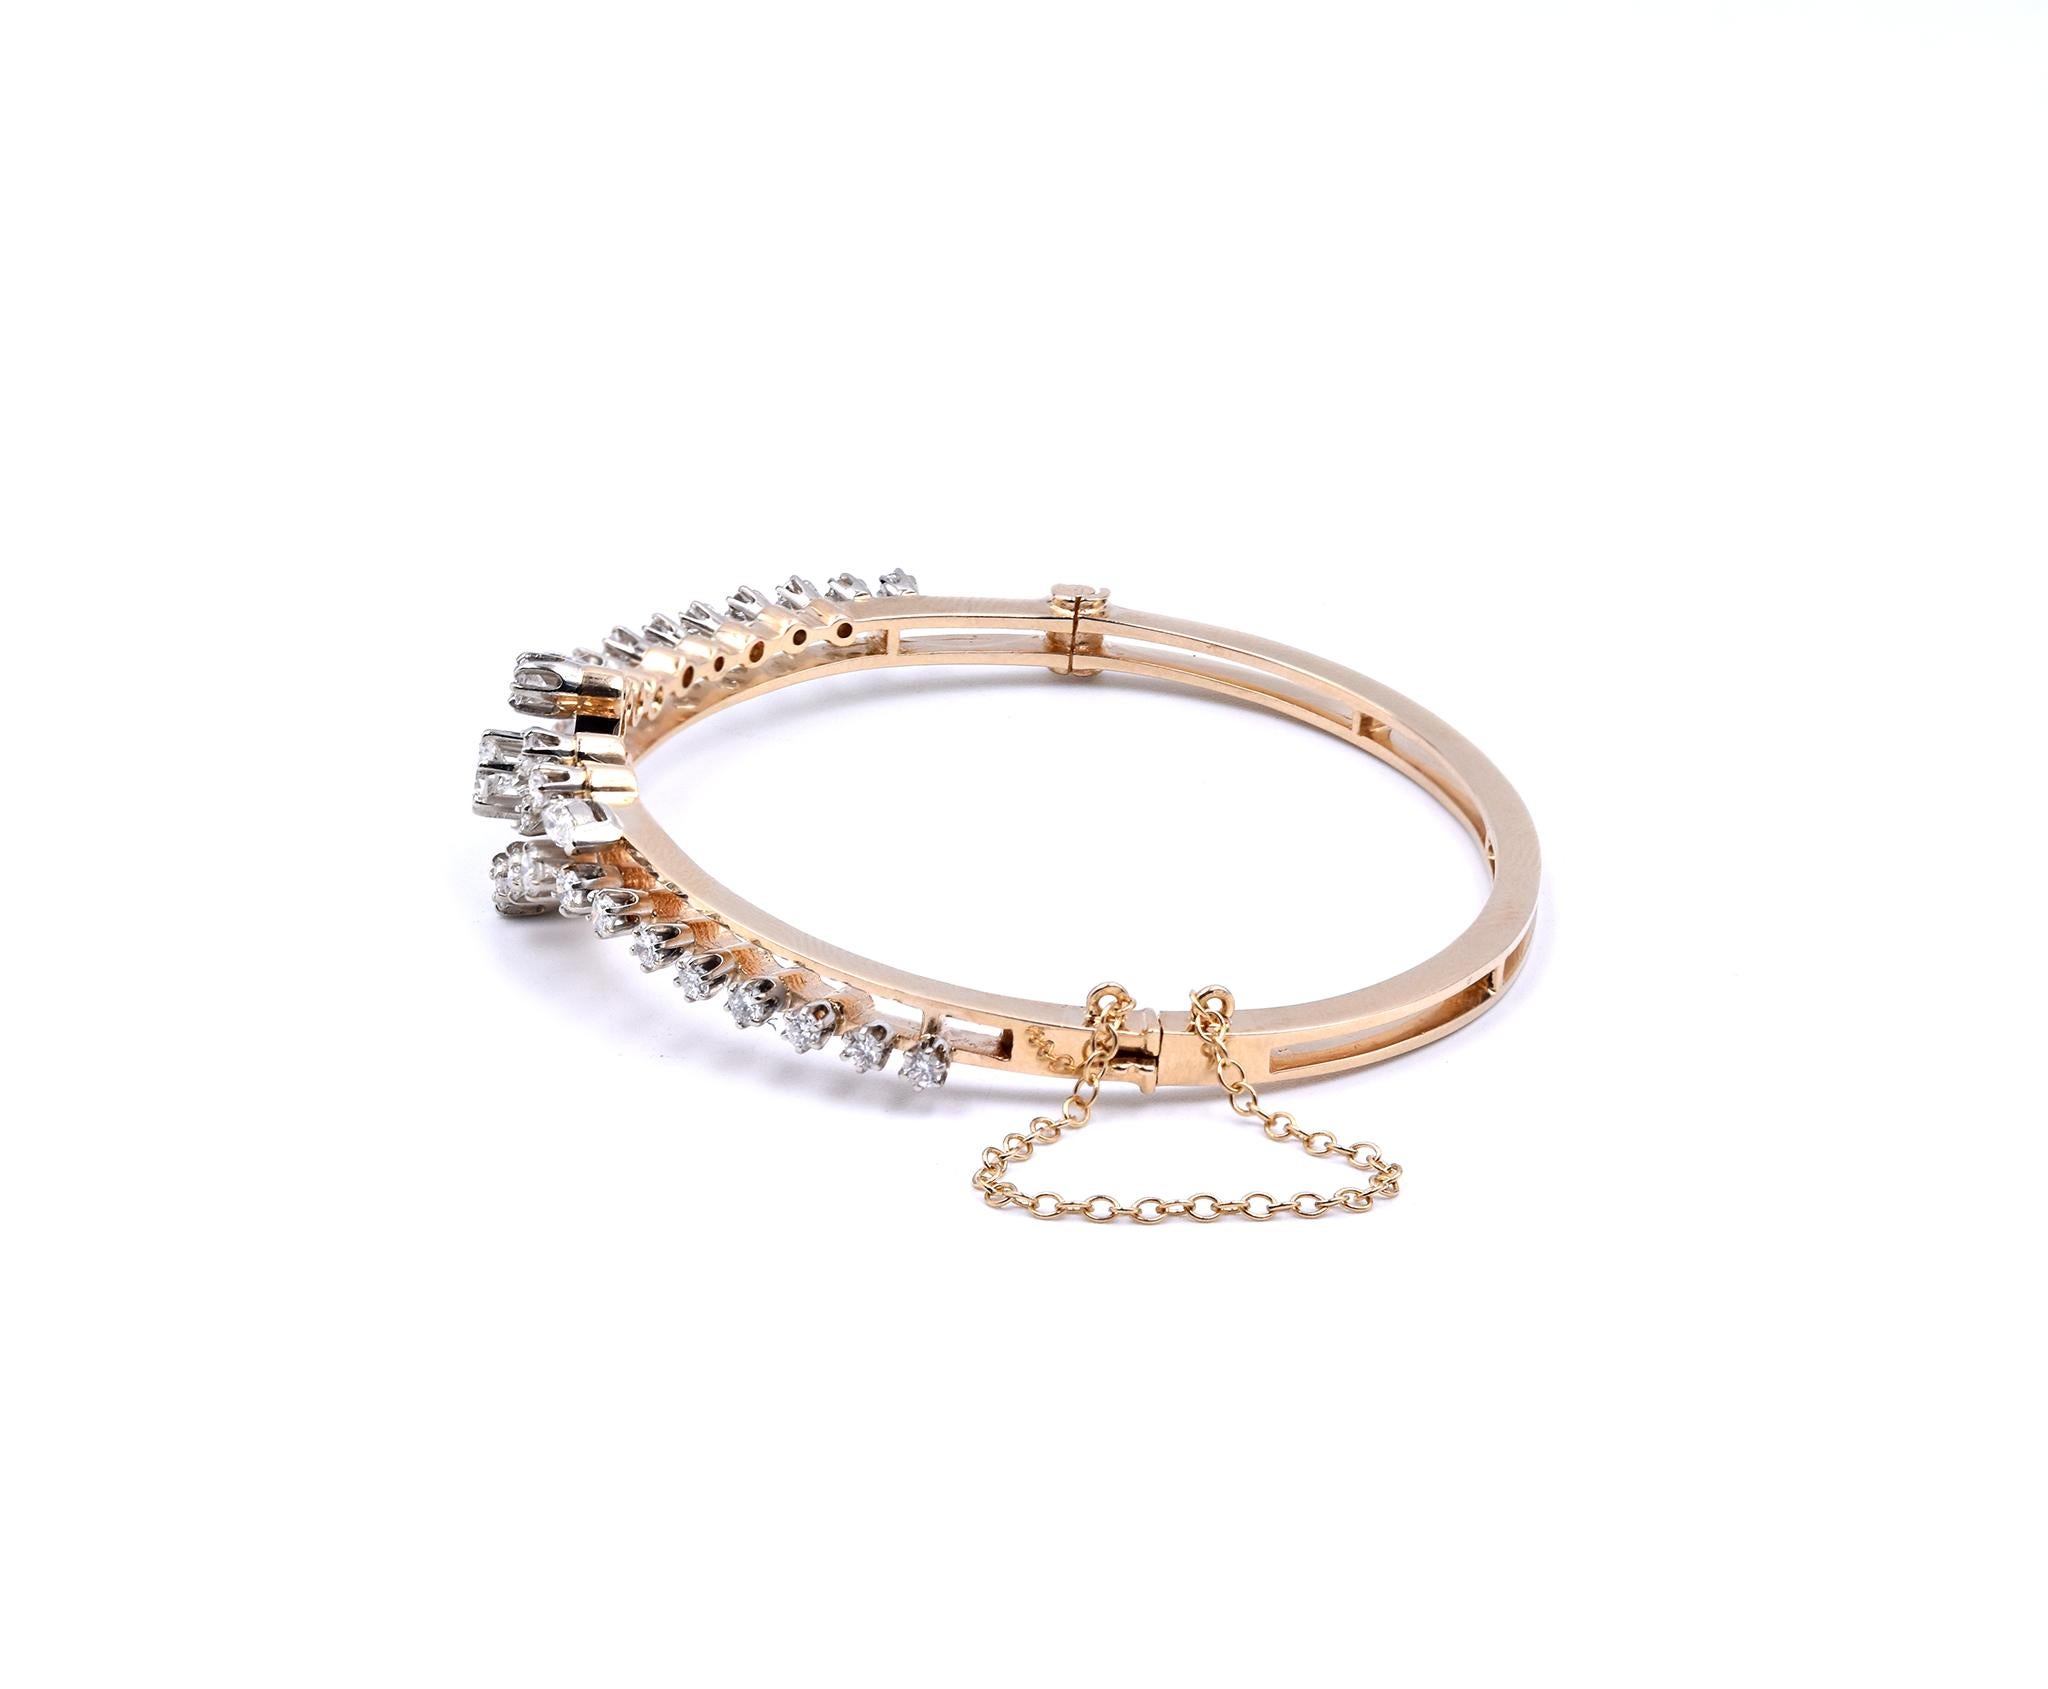 Material: 14K yellow gold
Diamonds: 29 round & 2 marquise cut = 1.25cttw
Color: H/I
Clarity: SI1
Dimensions: bracelet will fit up to a 7-inch wrist
Weight: 17.50 grams
